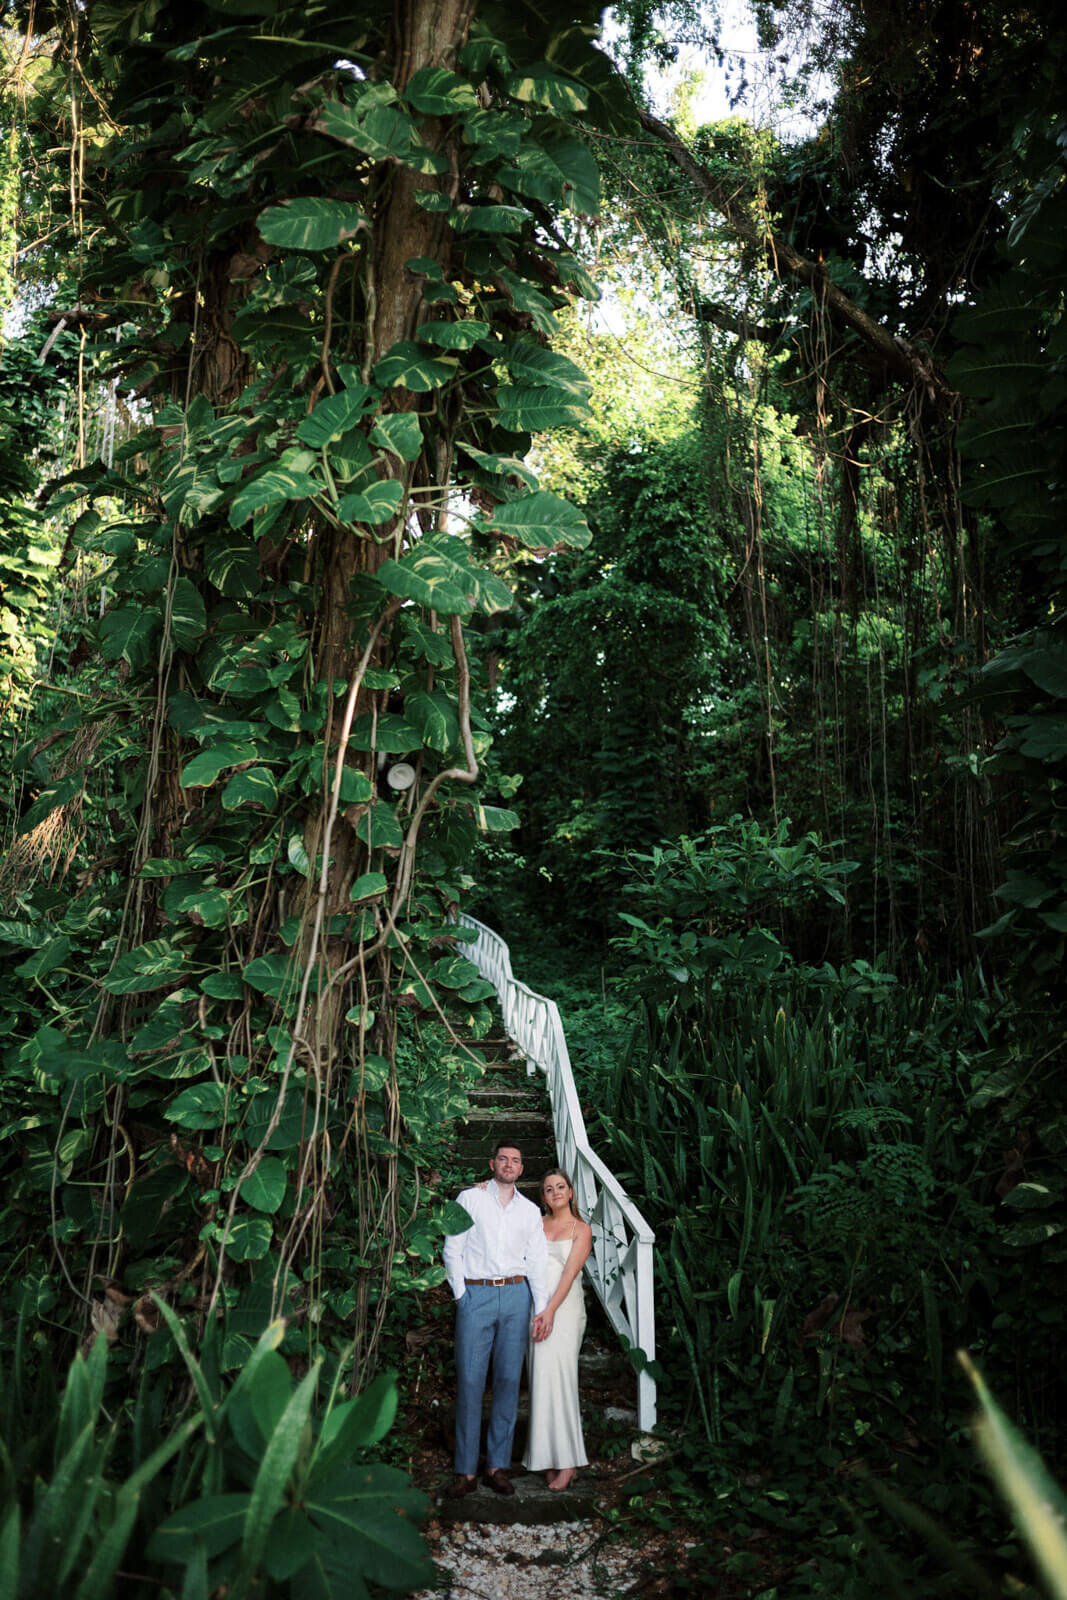 The engaged couple is standing at the foot of a very high stone staircase in the middle of lush greens in Jamaica.